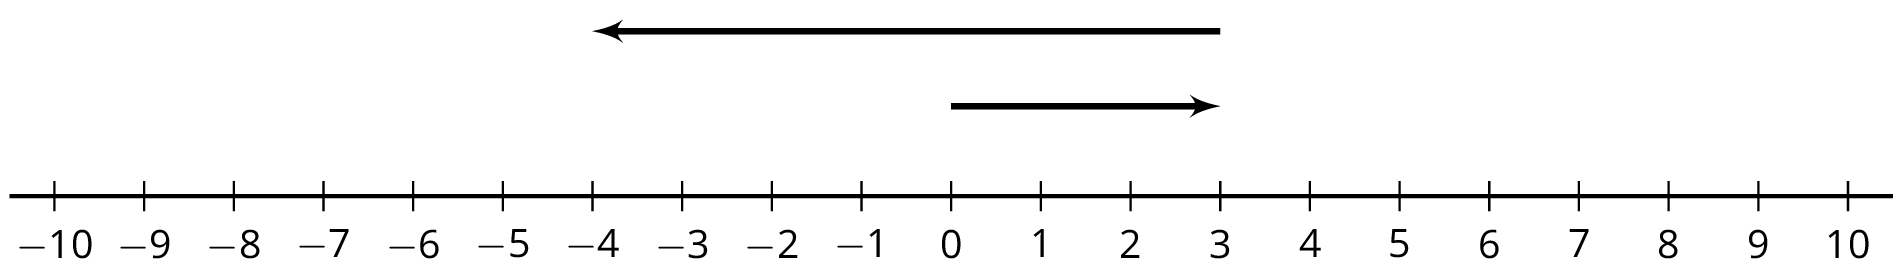 A number line with the numbers negative 10 through 10 indicated. An arrow starts at 3, points to the left, and ends at negative 4. A second arrow starts at 0, points to the right, and ends at 3.